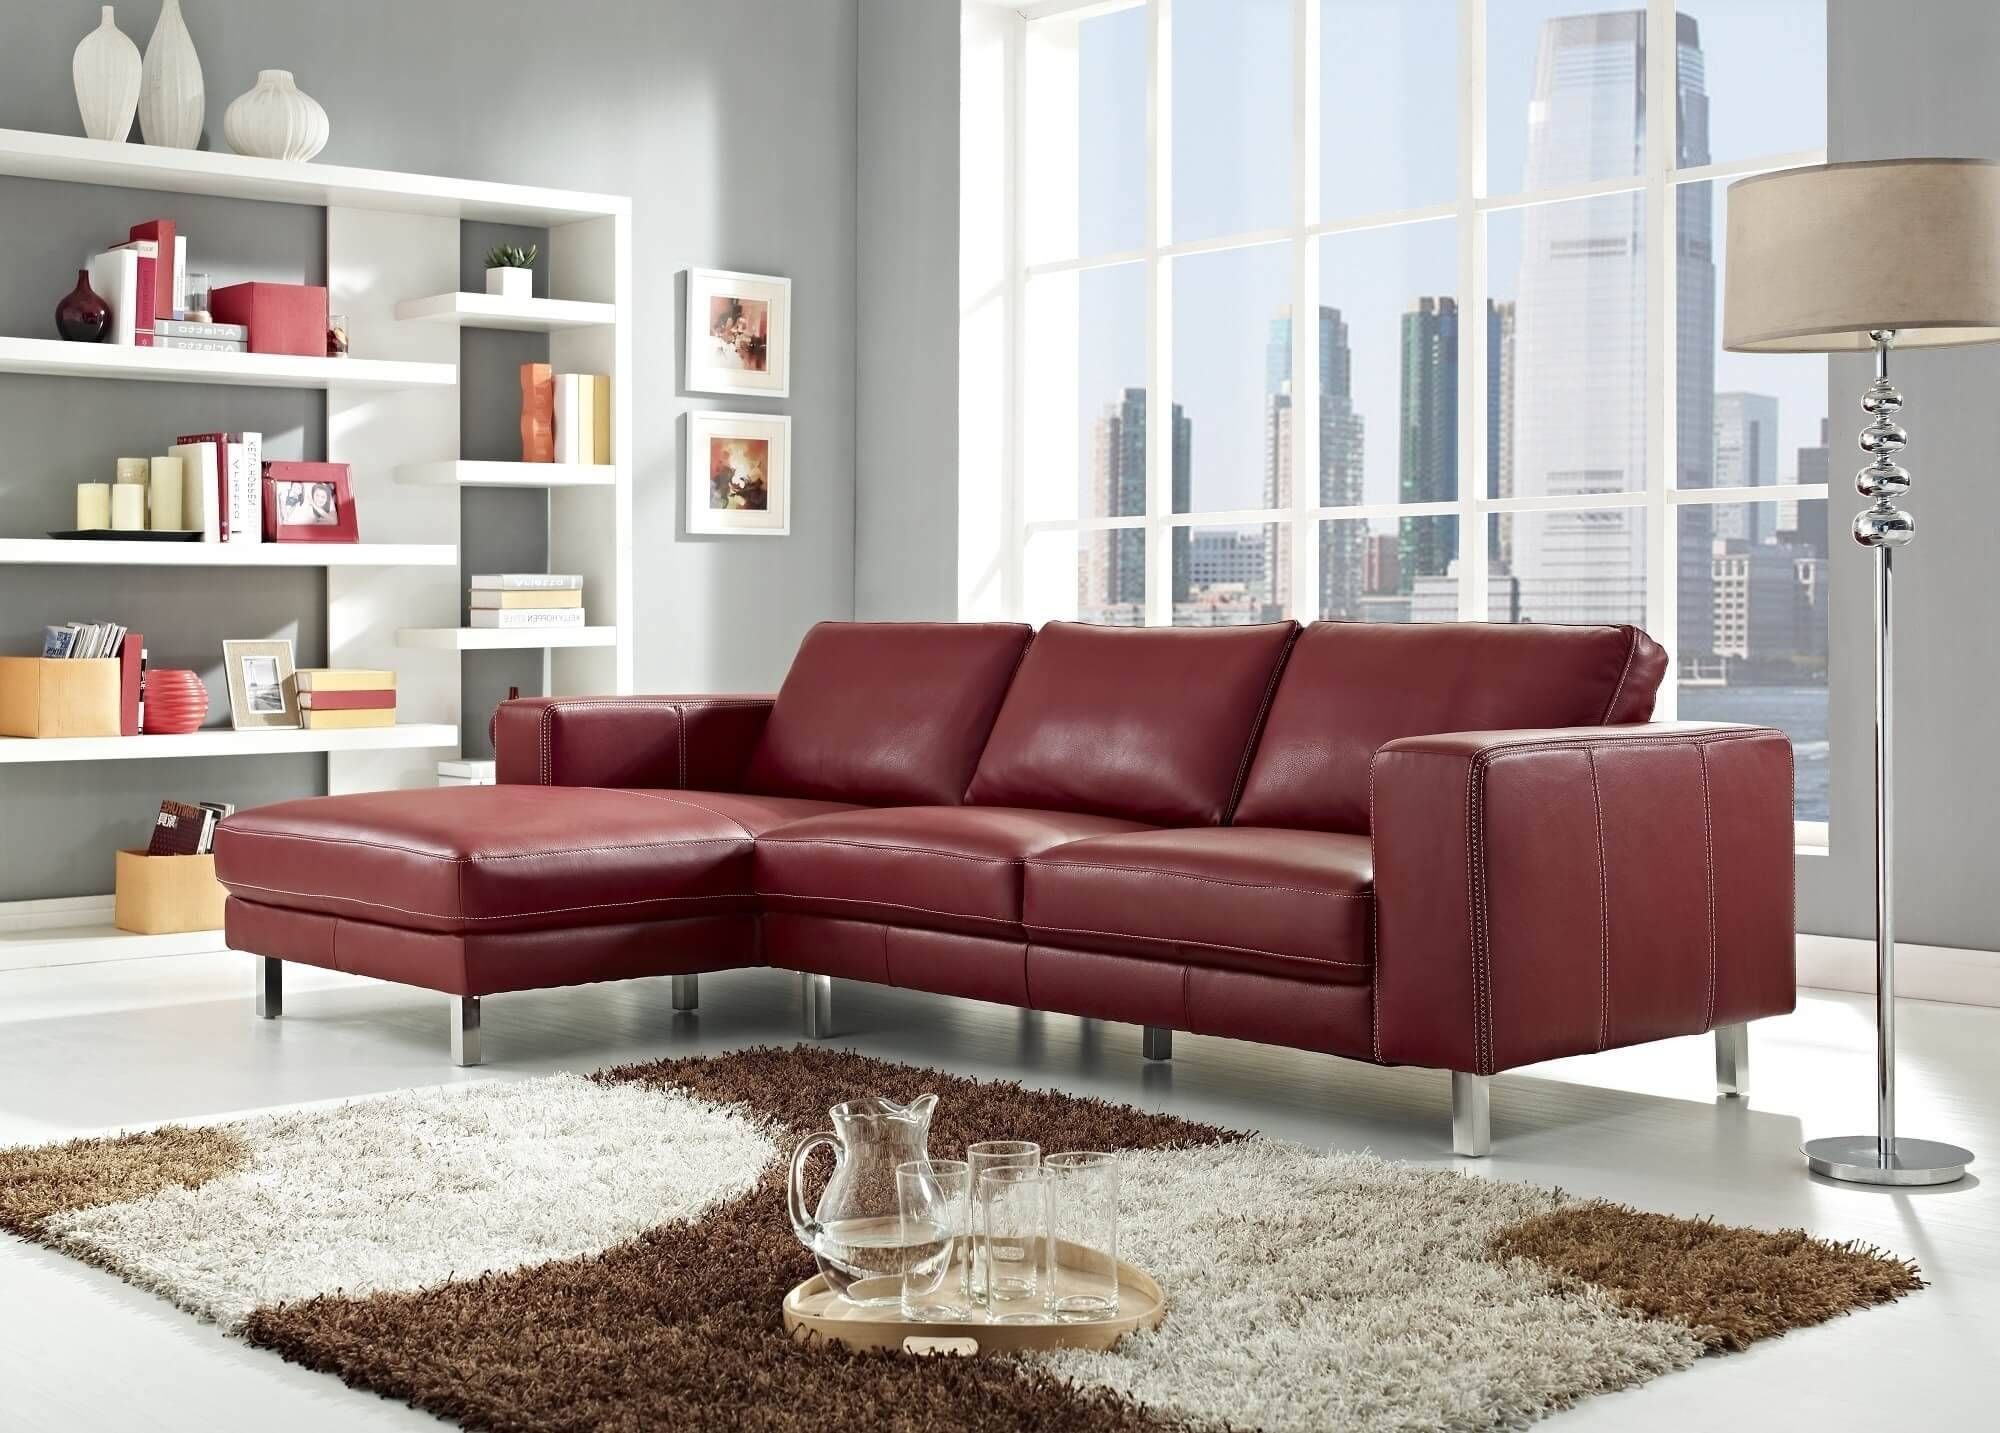 Cheap Leather Sofas | Roselawnlutheran For Cheap Retro Sofas (View 26 of 30)